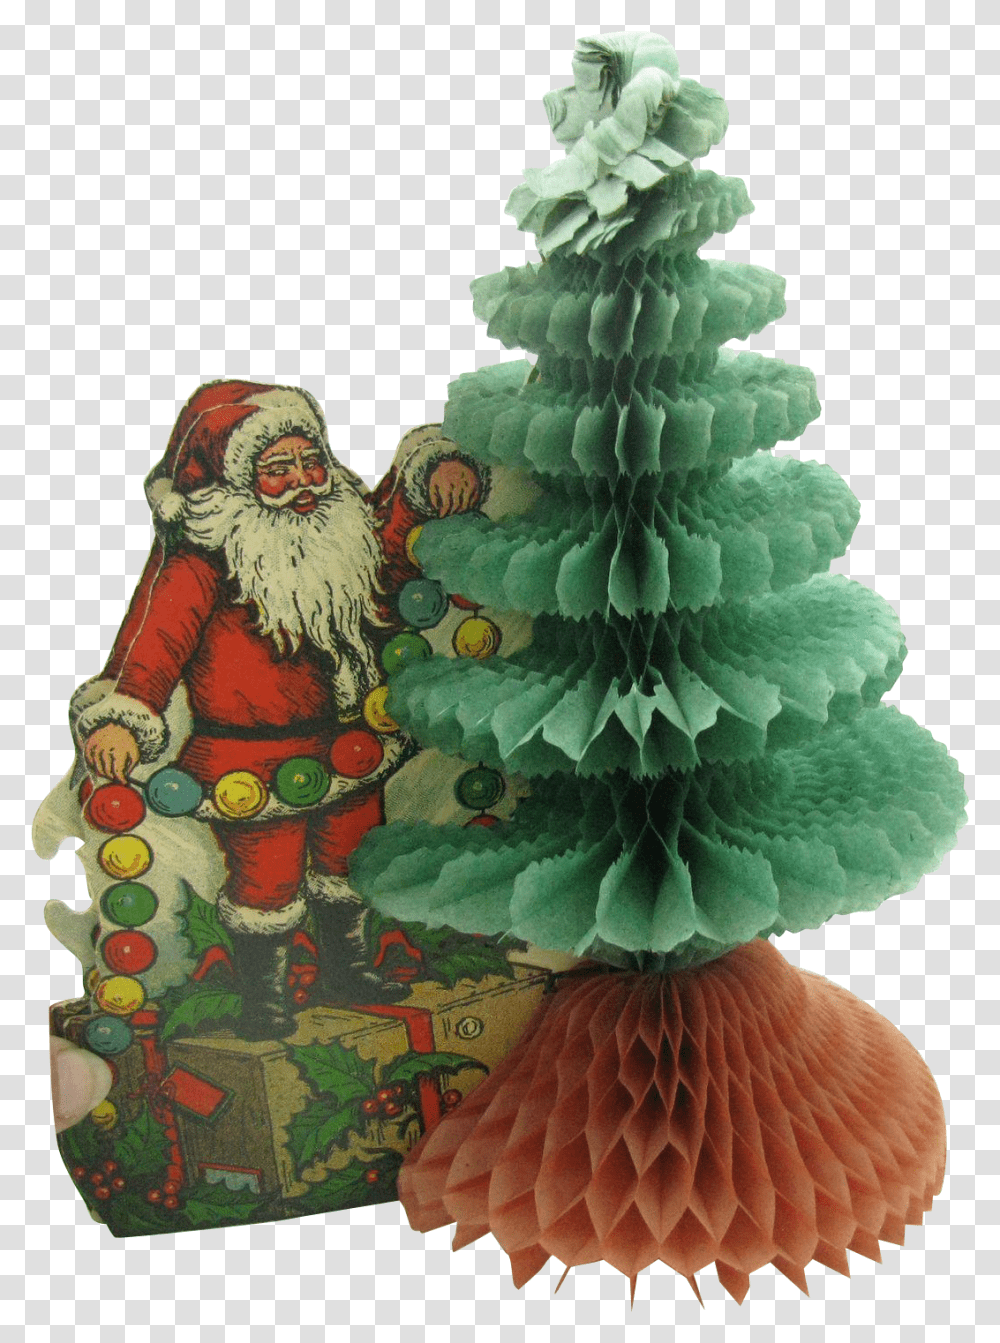 S Beistle Honeycomb Tree With Santa Ruby Lane Christmas, Plant, Ornament, Christmas Tree Transparent Png